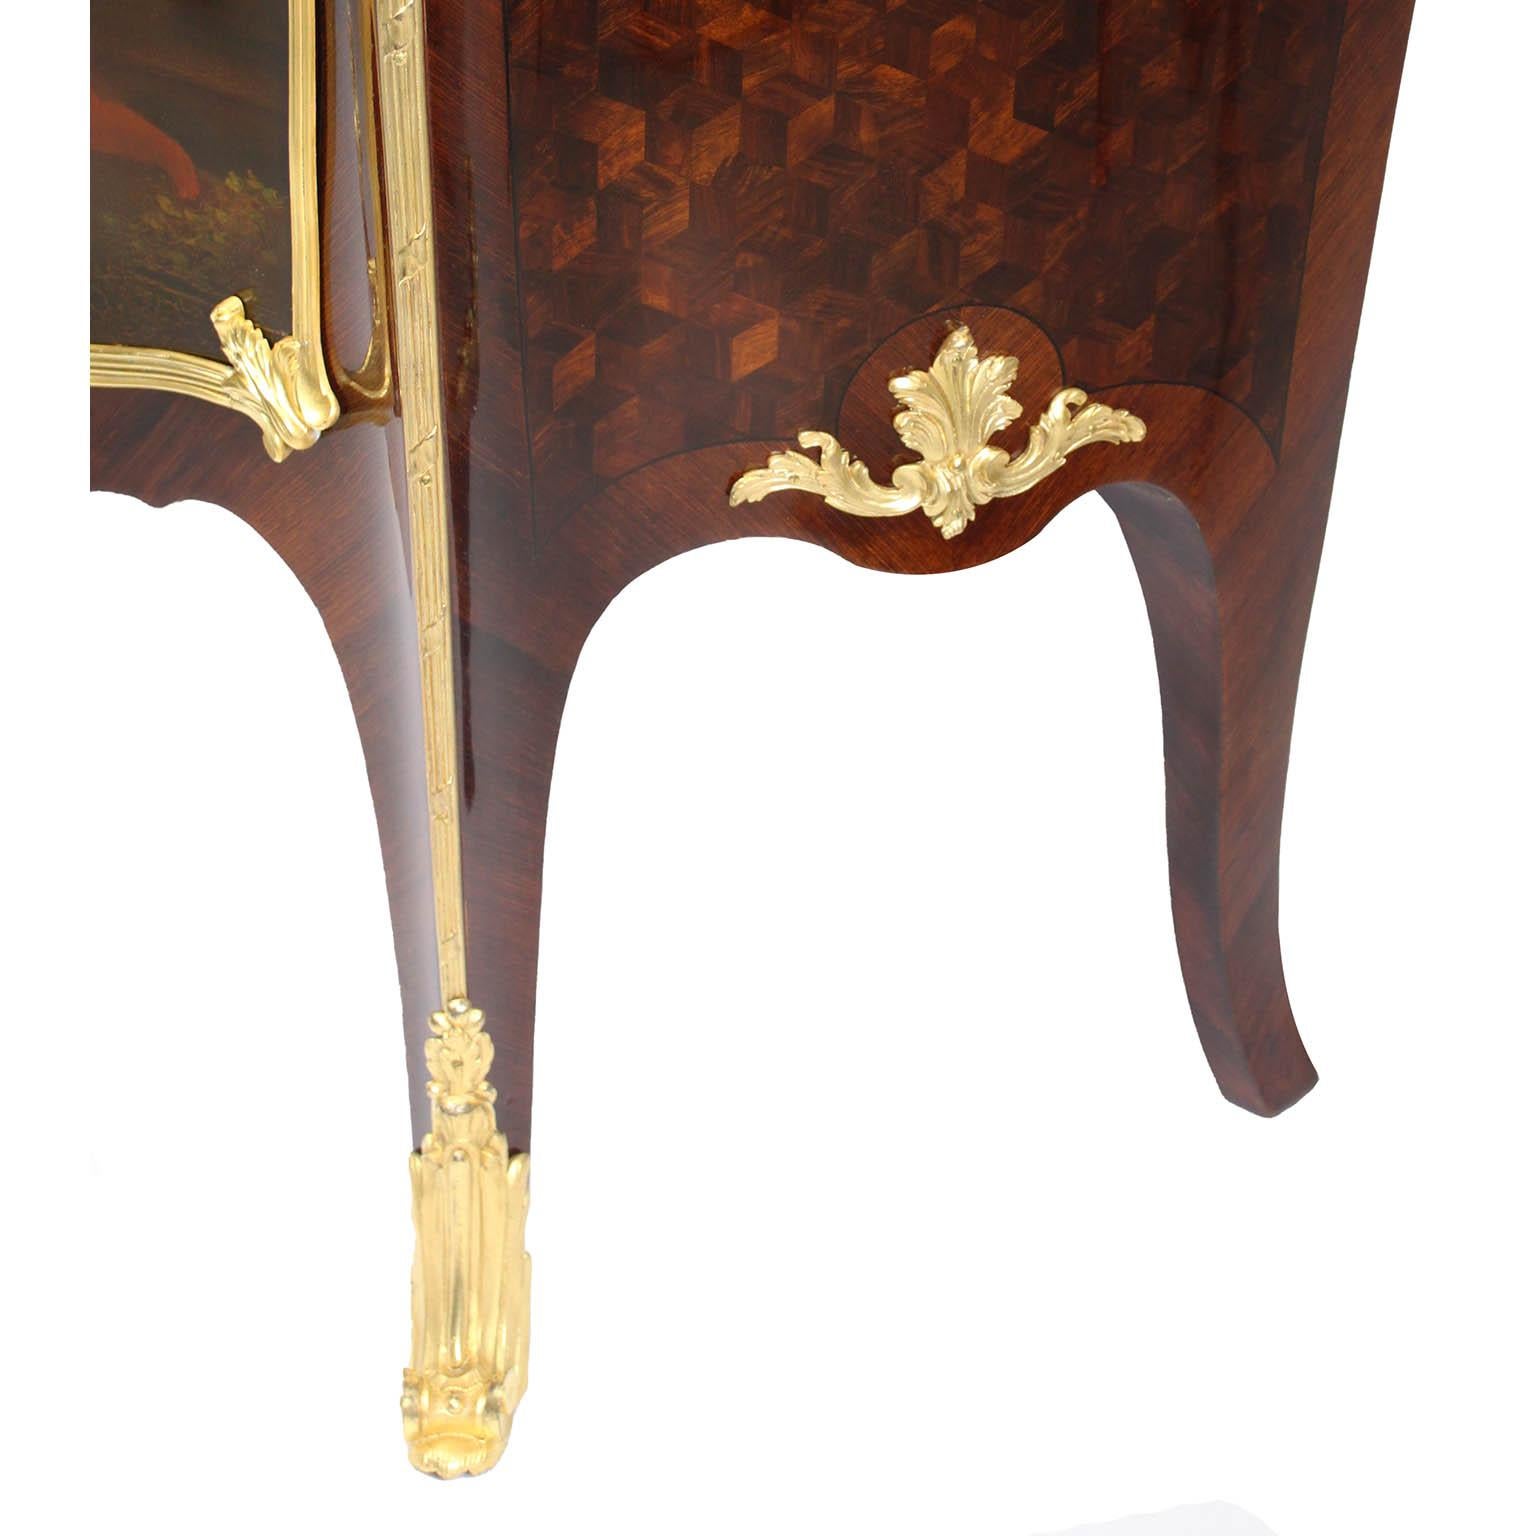 French 19th C. Louis XV Style Ormolu-Mounted Vernis Martin Cabinet by F. Linke For Sale 2